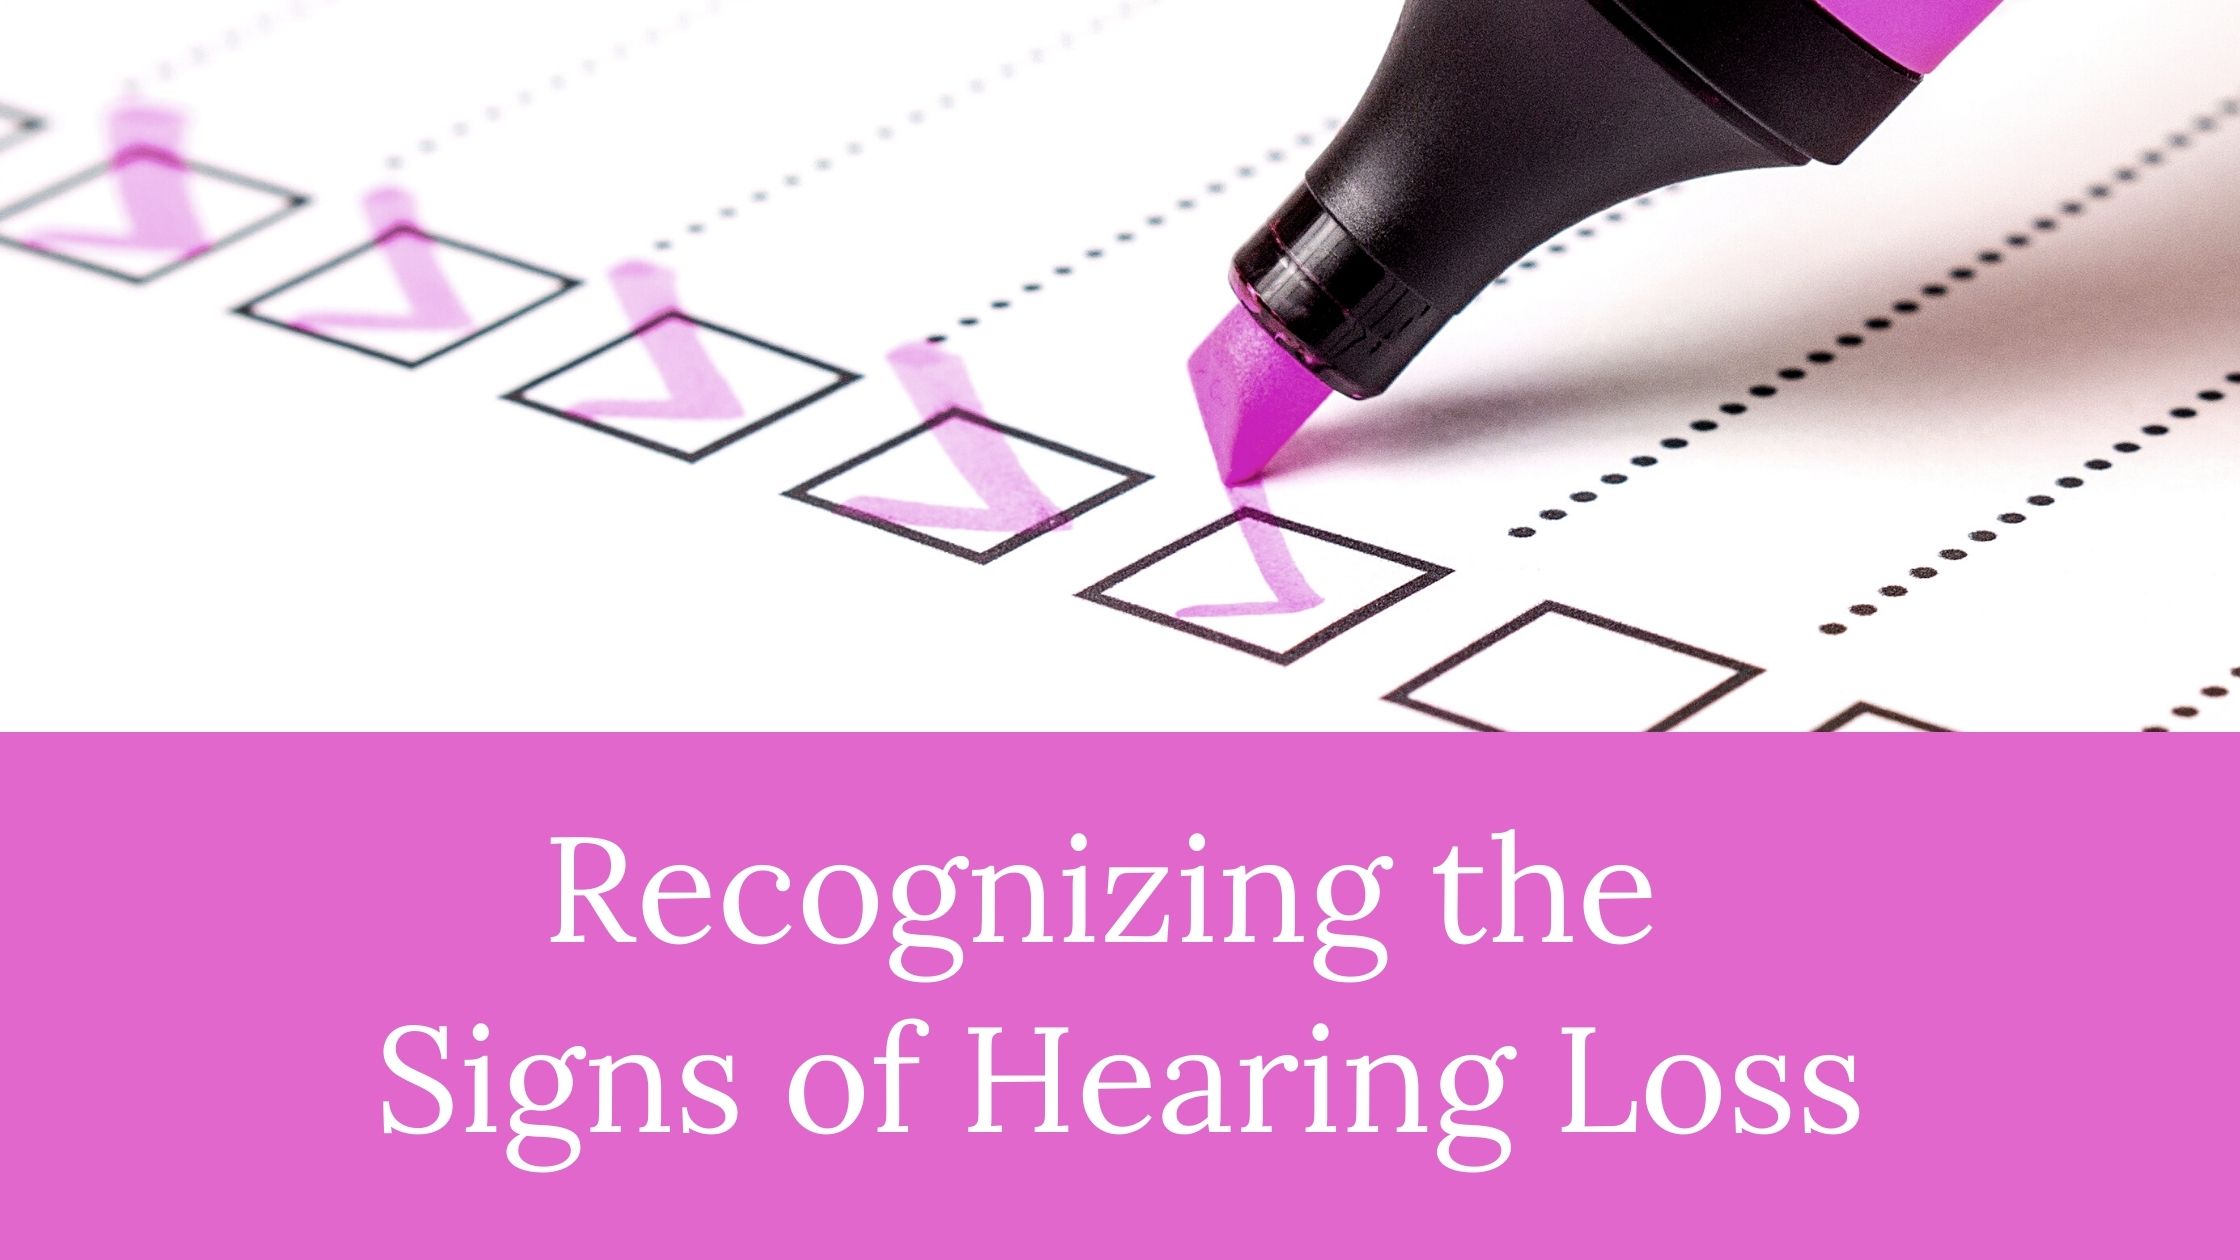 Recognizing the Signs of Hearing Loss